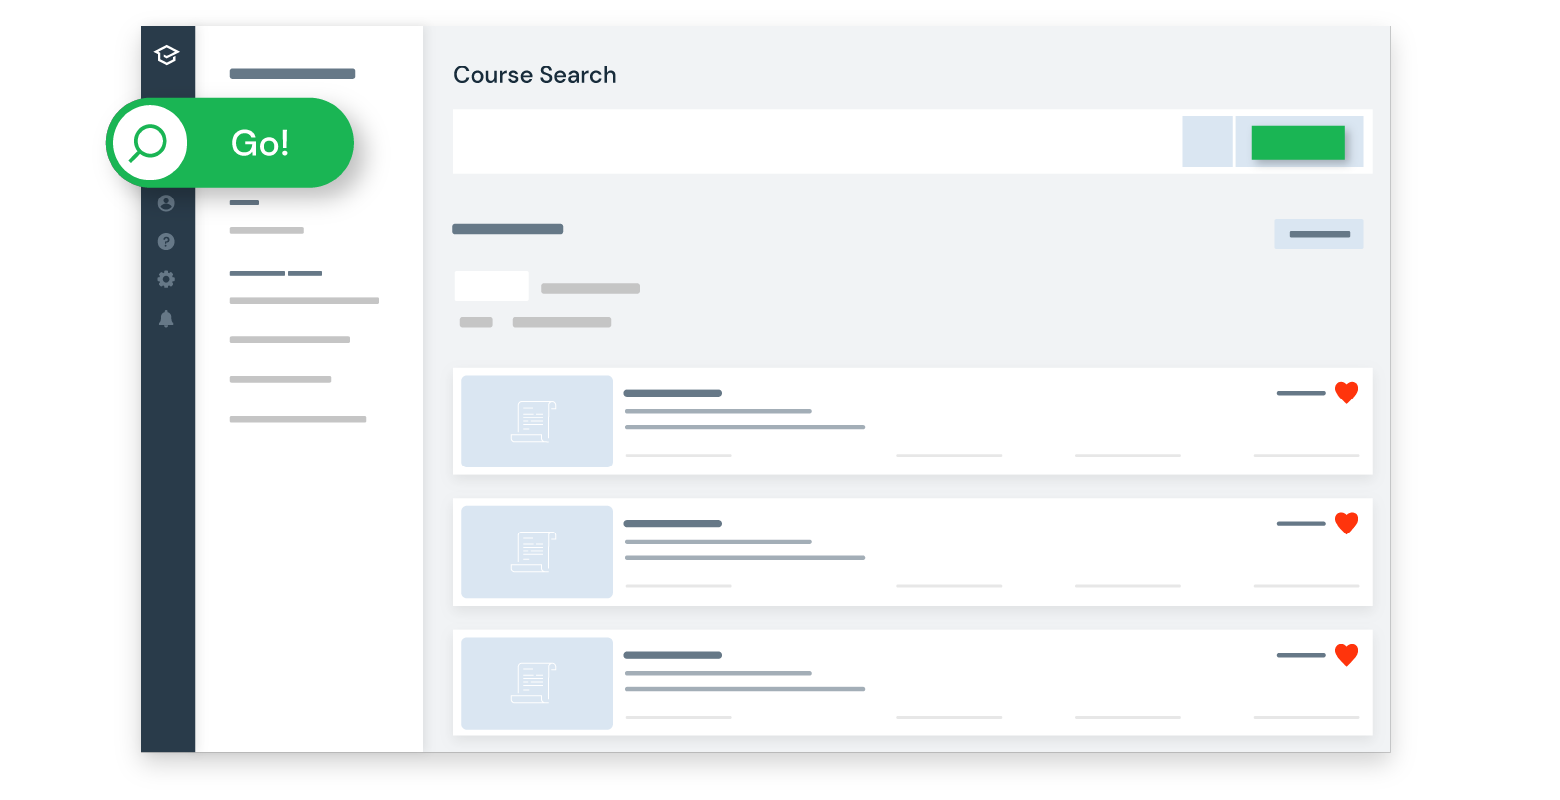 Introducing a faster way to search courses